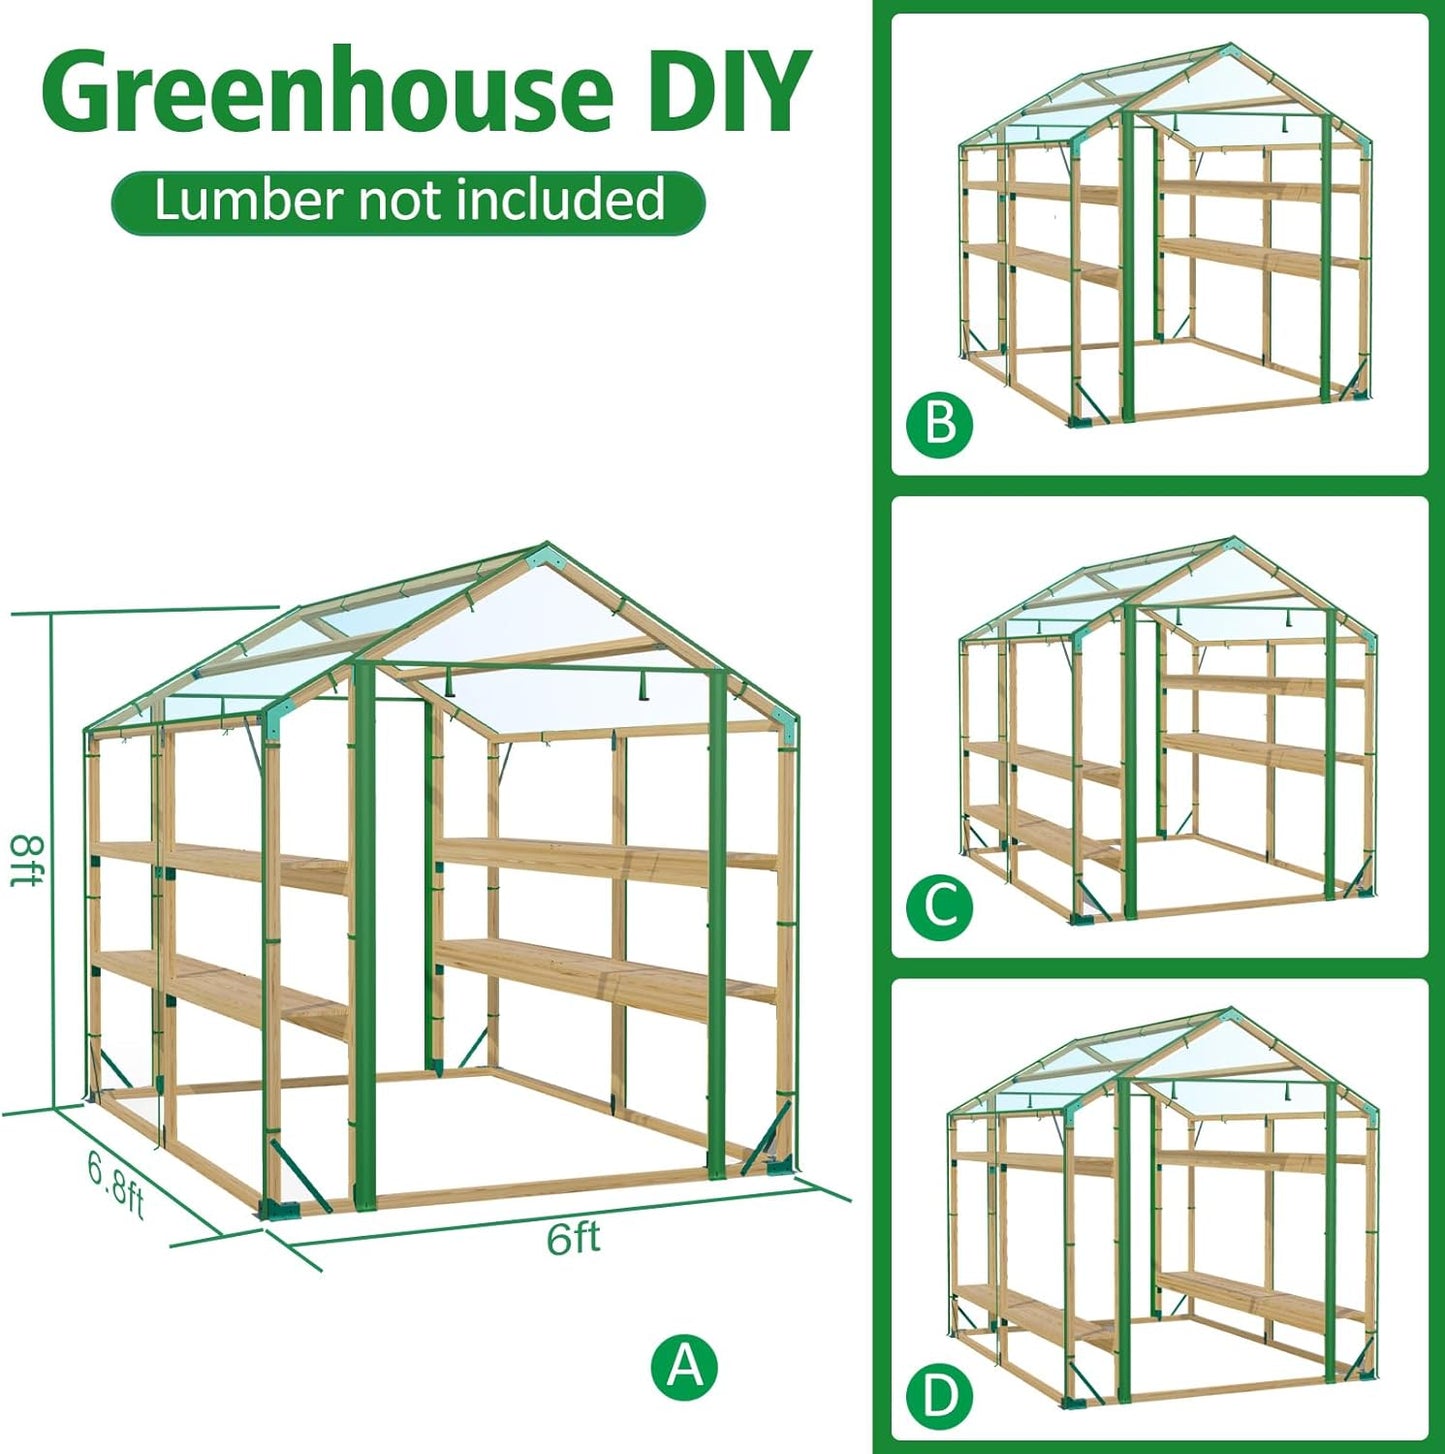 Walk in Greenhouse, 8X6Ft Green House for Plants, Include Greenhouse Kit and Greenhouse PVC Cover, Portable Greenhouses for Outdoors Winter - Design By Technique